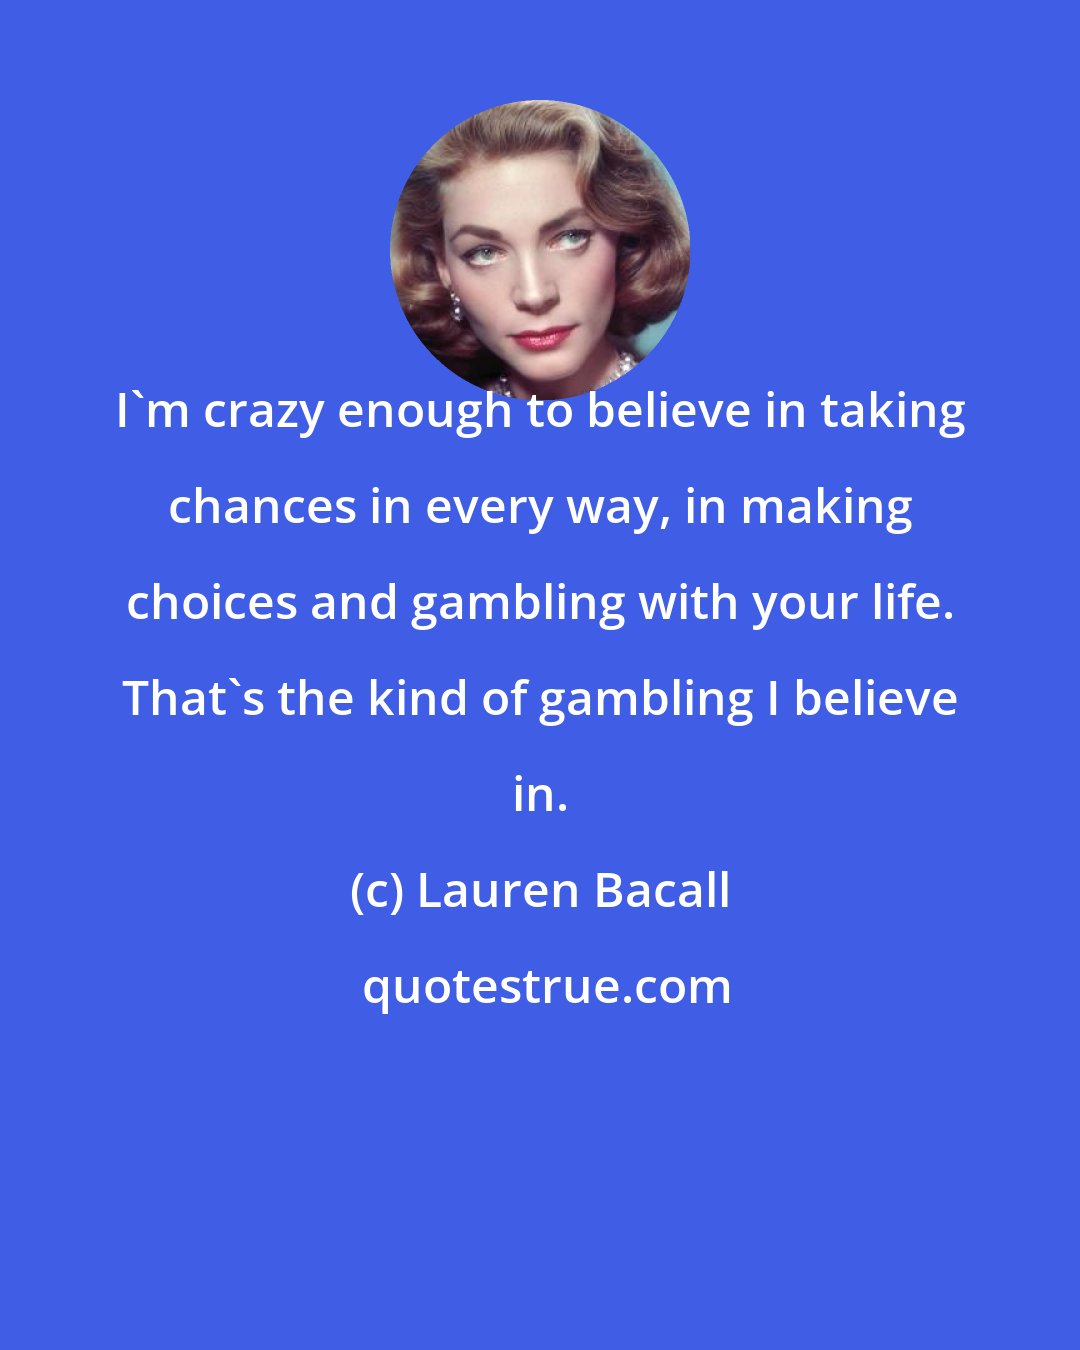 Lauren Bacall: I'm crazy enough to believe in taking chances in every way, in making choices and gambling with your life. That's the kind of gambling I believe in.